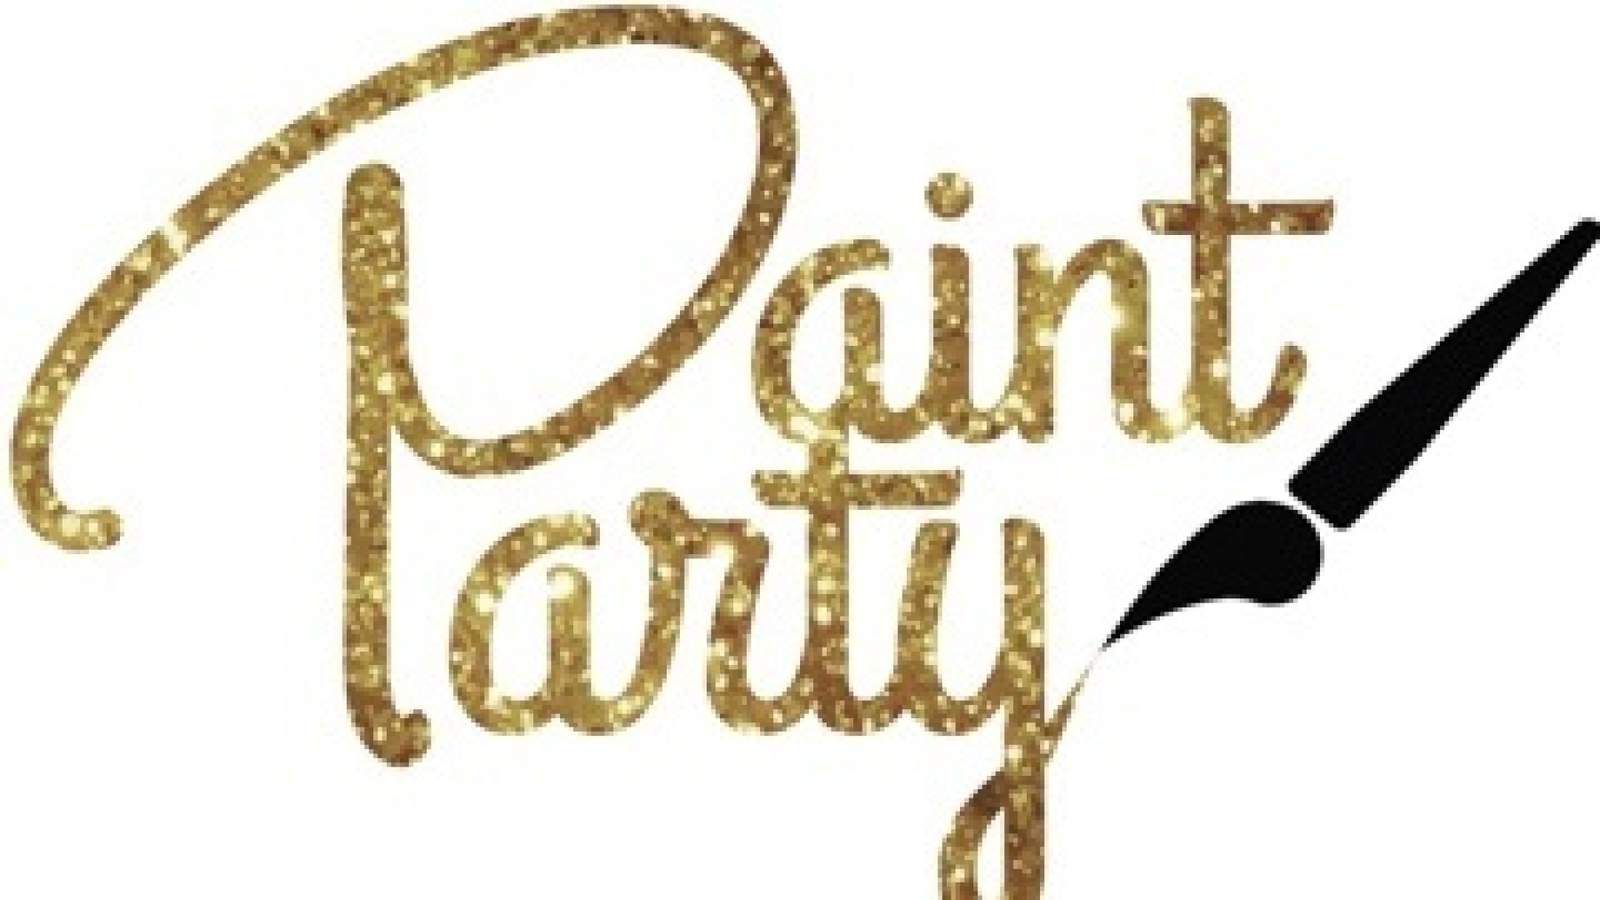 Bring the Paint Party to your doorstep